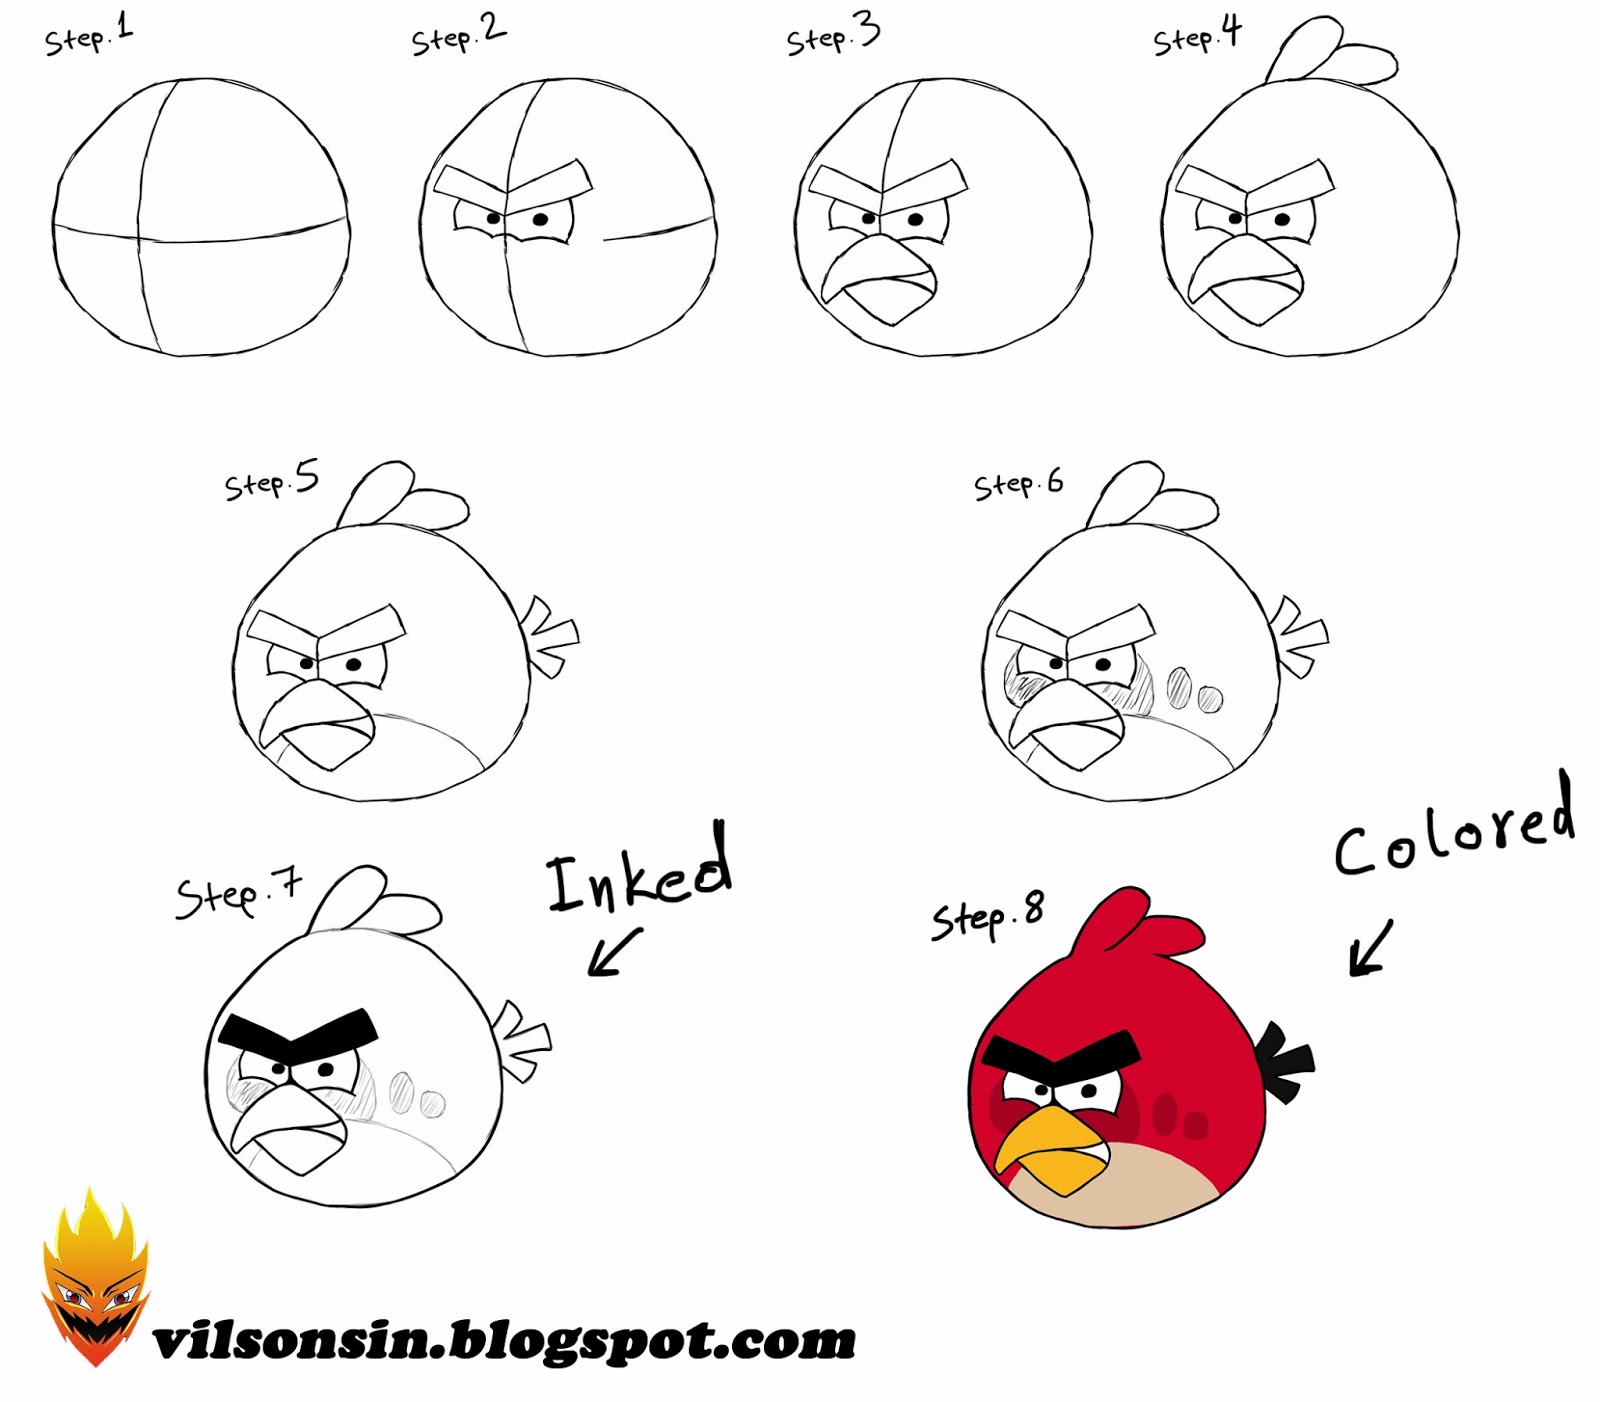 red+angry+bird.jpg (1600×1402) | Pen to Paper | Pinterest